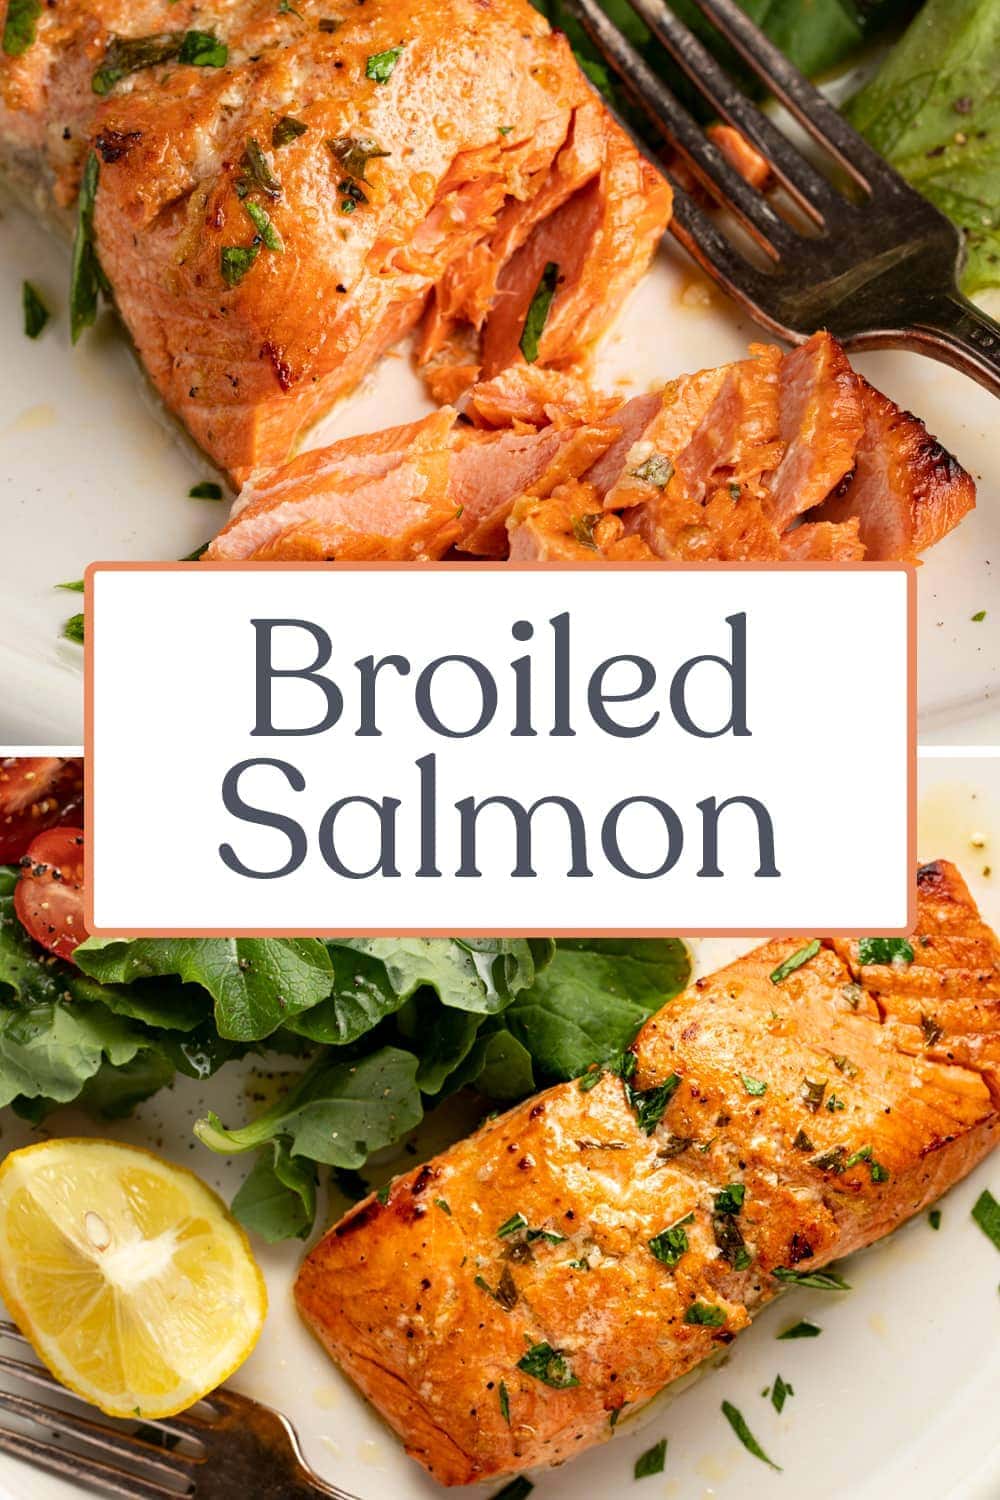 Broiled Salmon in a Simple Marinade - 40 Aprons